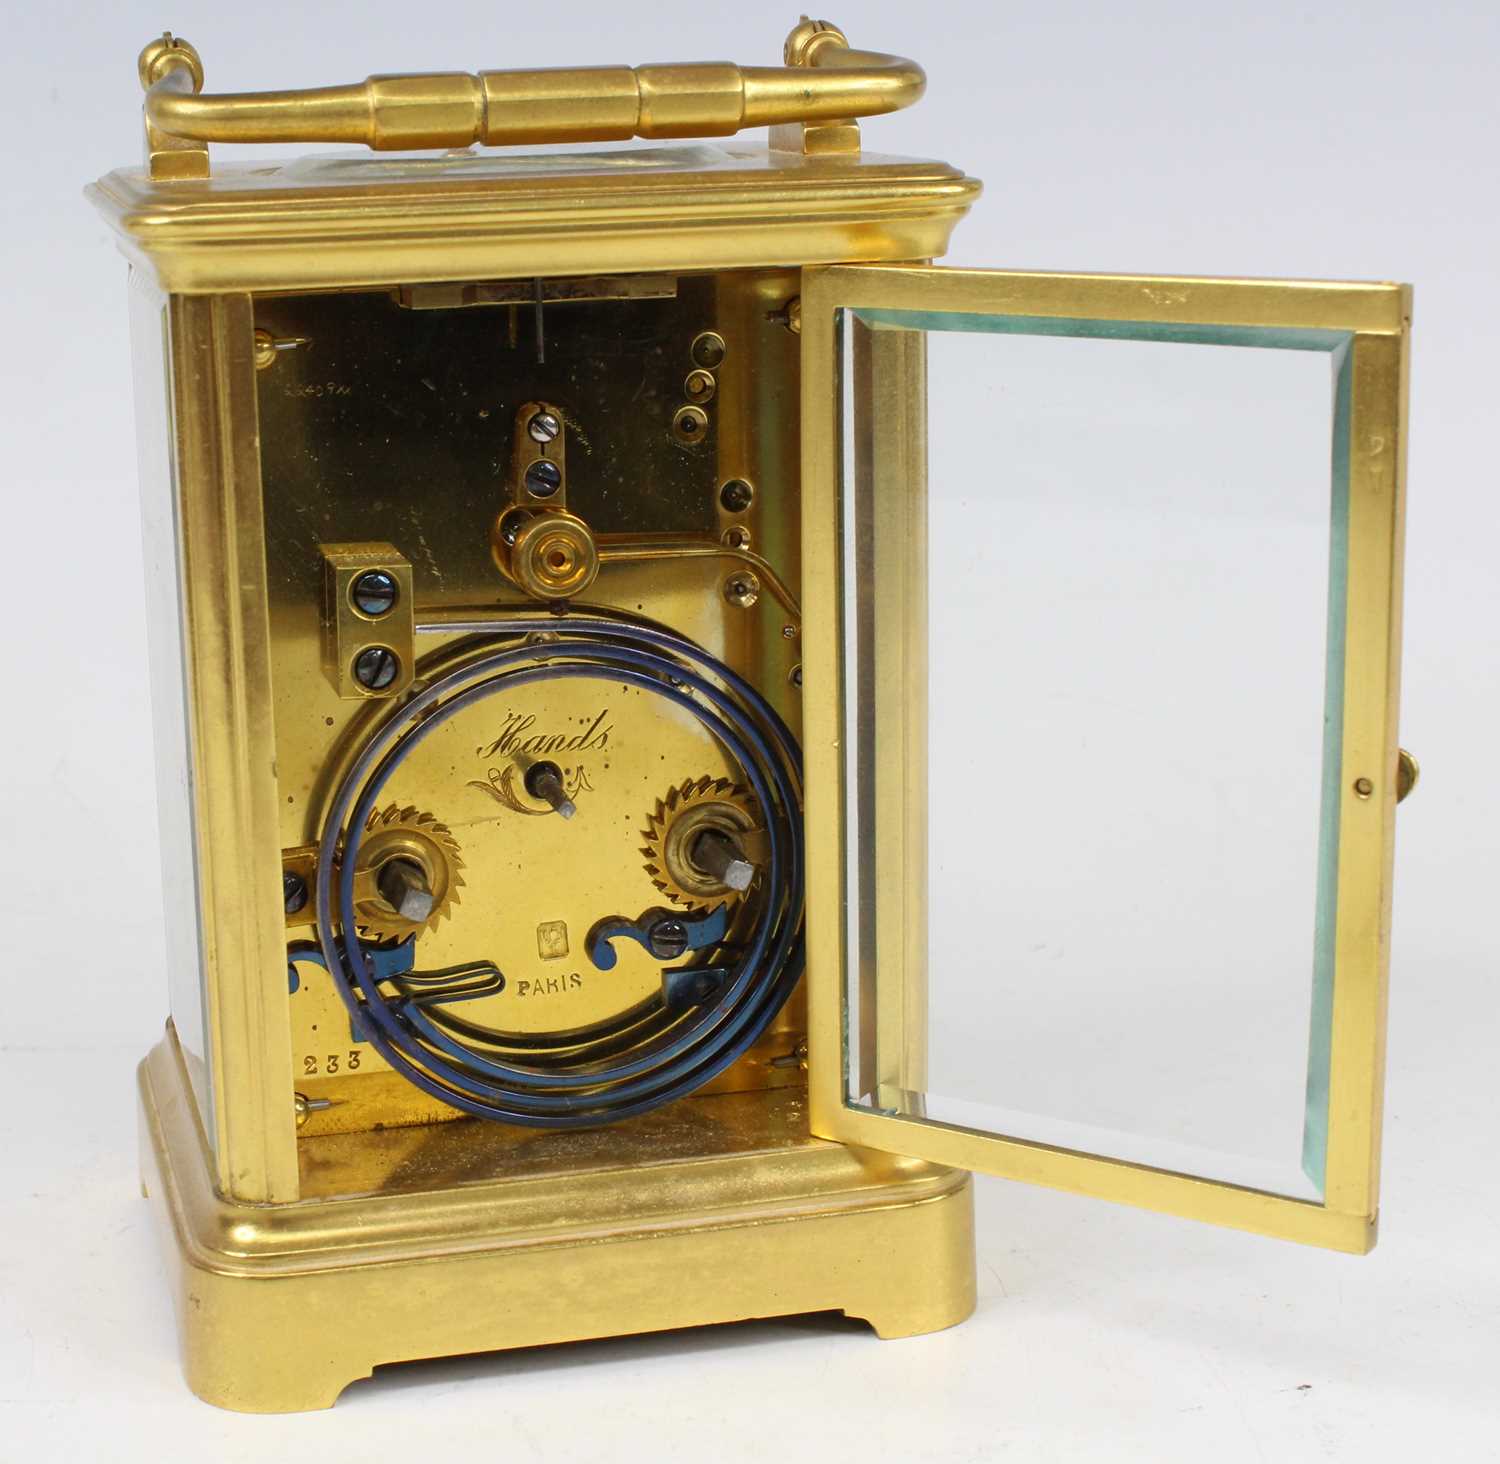 A late 19th century French lacquered brass carriage clock by Henri Jacot of Paris, having an - Image 3 of 5